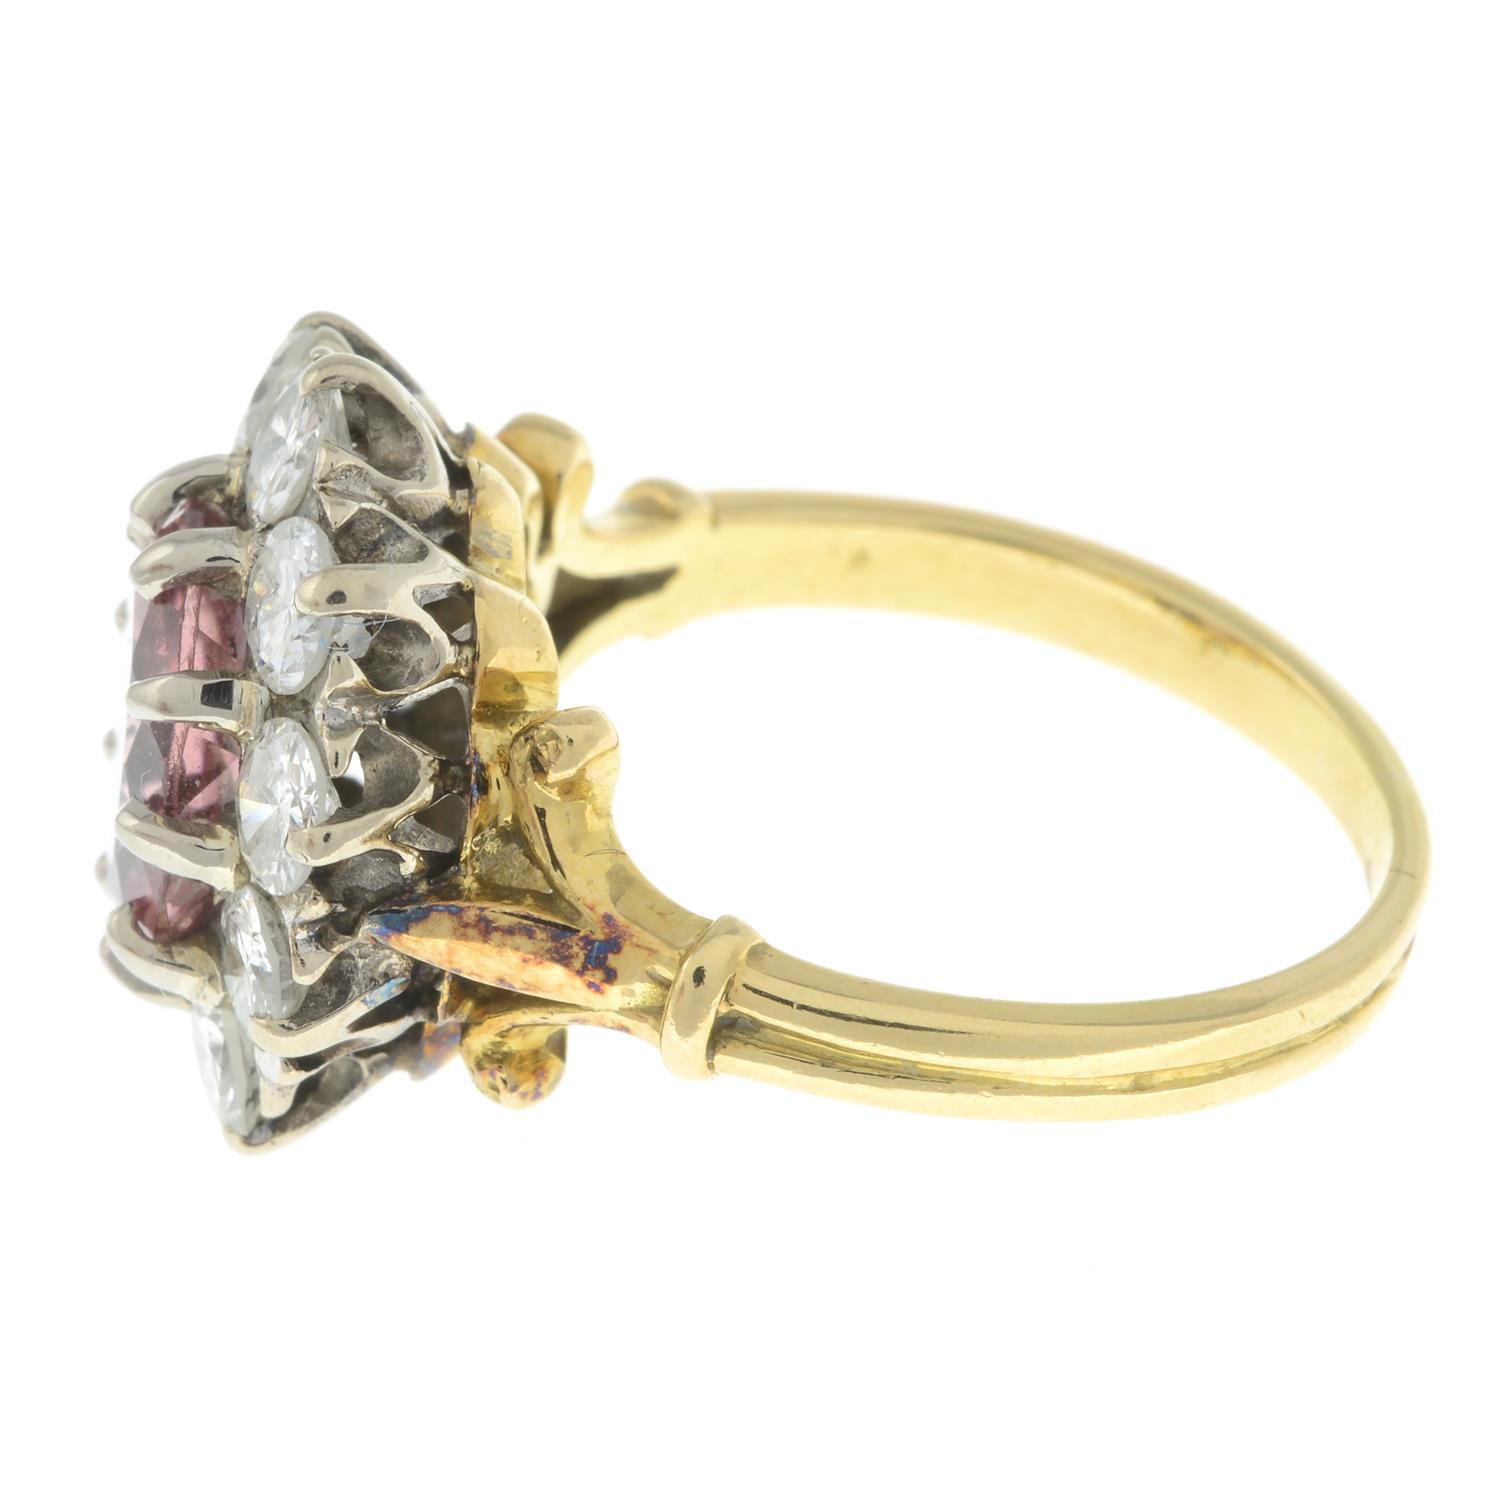 Pink tourmaline and diamond cluster ring - Image 4 of 5